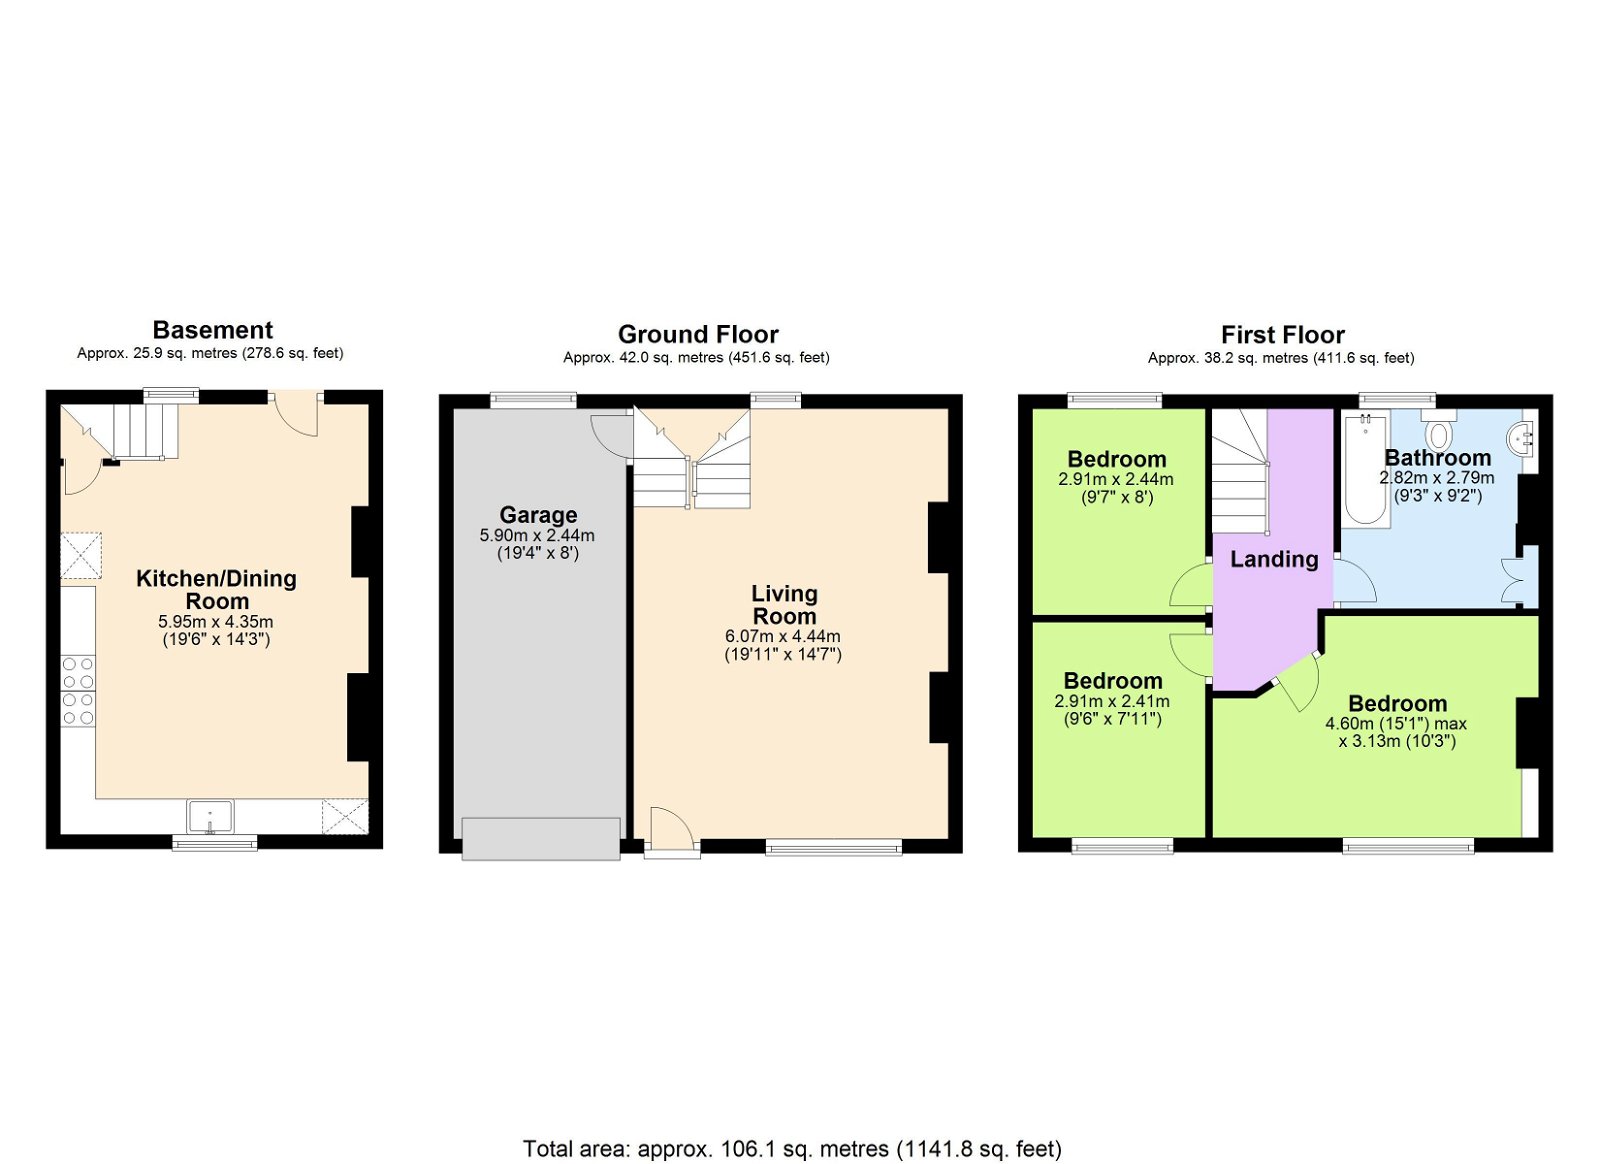 Floorplans For Within Easy Reach Of Hawkhurst Colonnade